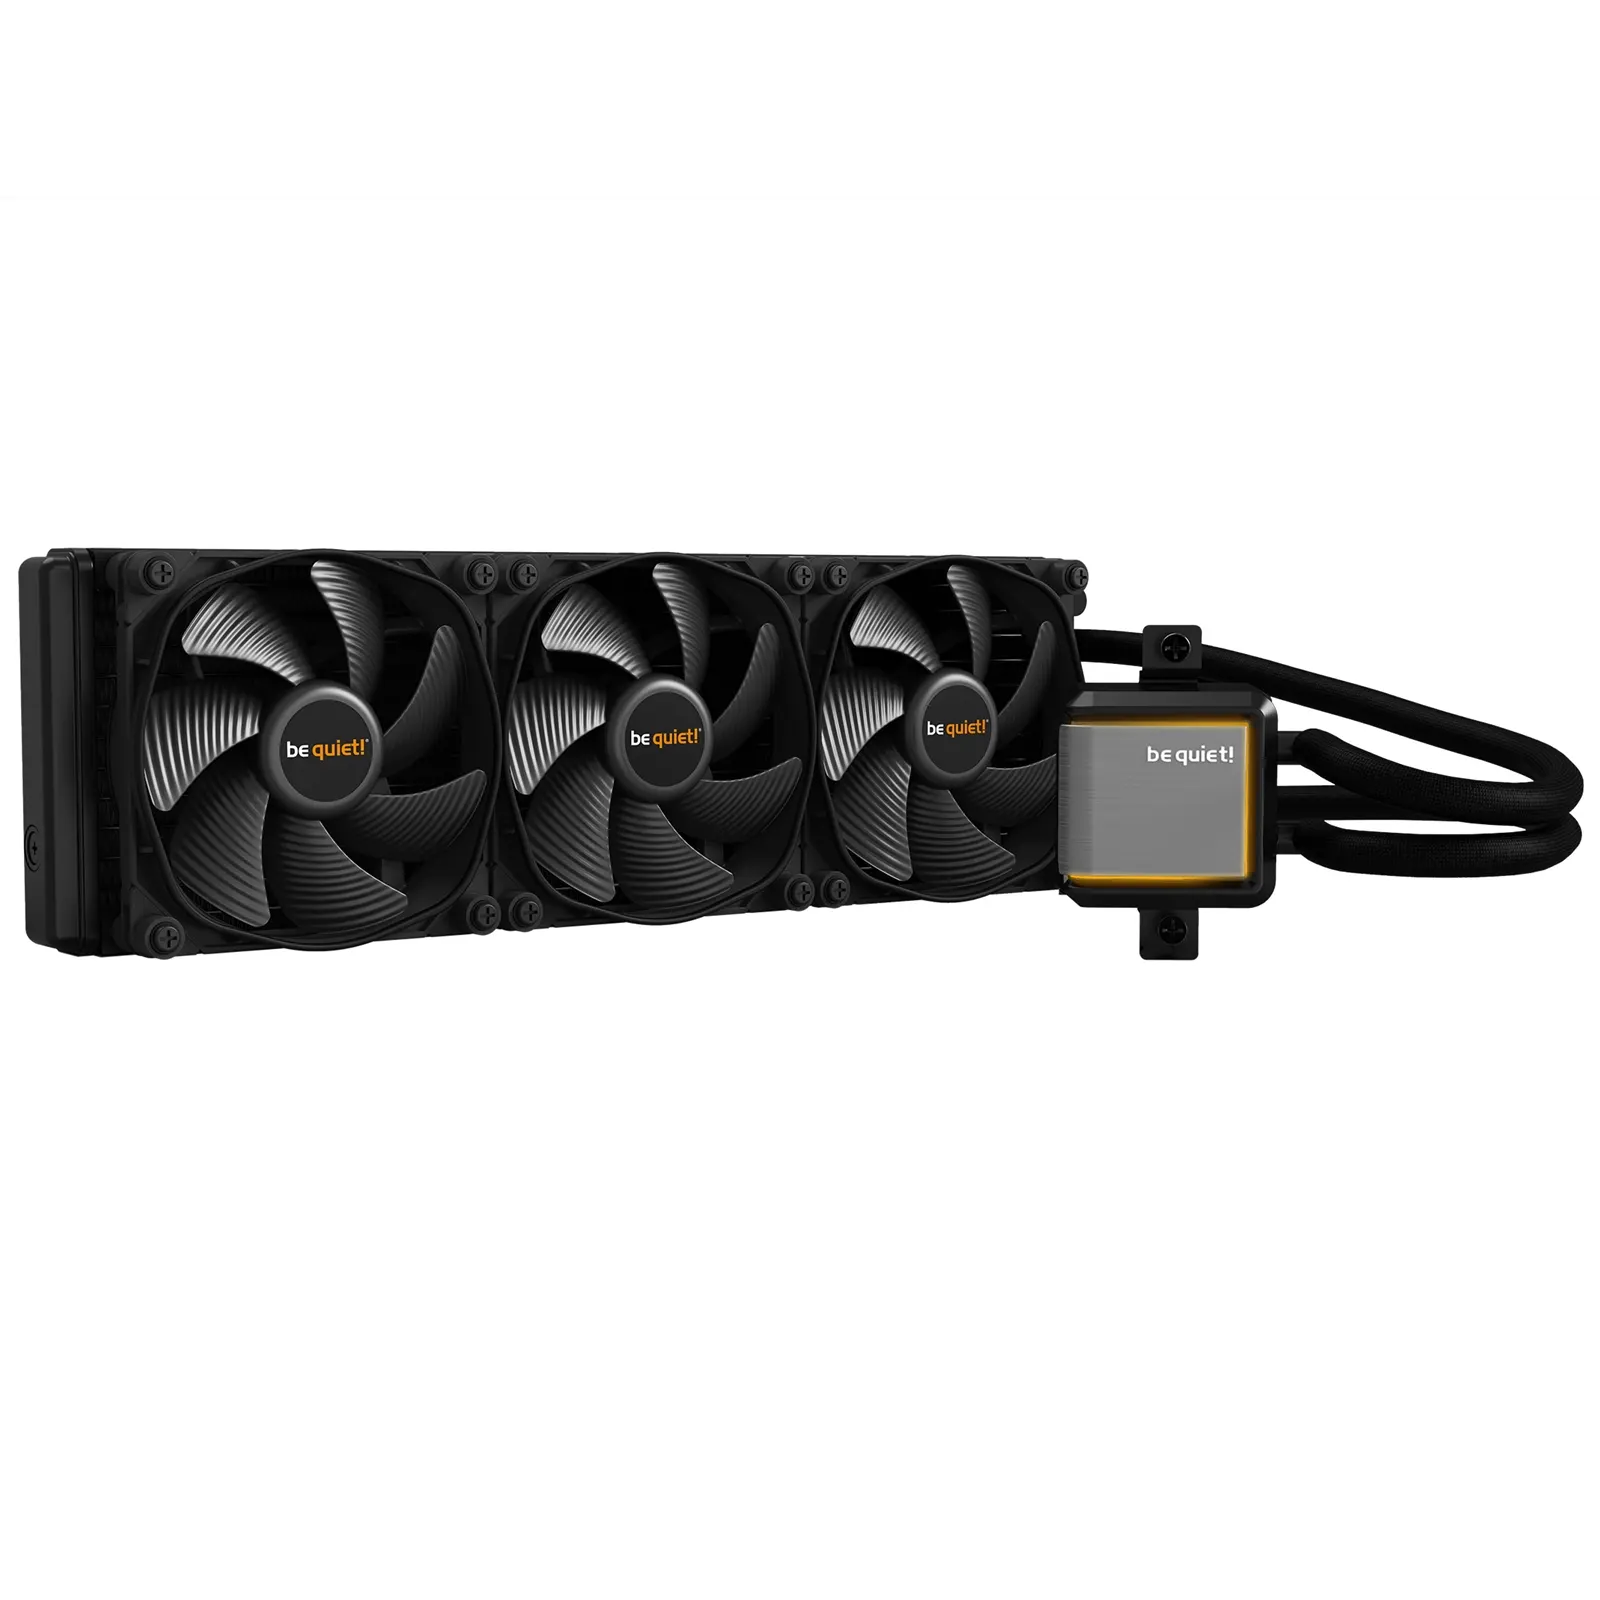 be quiet! Silent Loop 2 AiO Liquid CPU Cooler, Universal Socket, 360mm Radiator, 3 x Silent Wings 3 120mm PWM High Speed 2200RPM Black Cooling Fan, Addressable RGB LED Pump Head with Powerful 3 Chamber Design to Significantly Reduce Turbulences & Noise